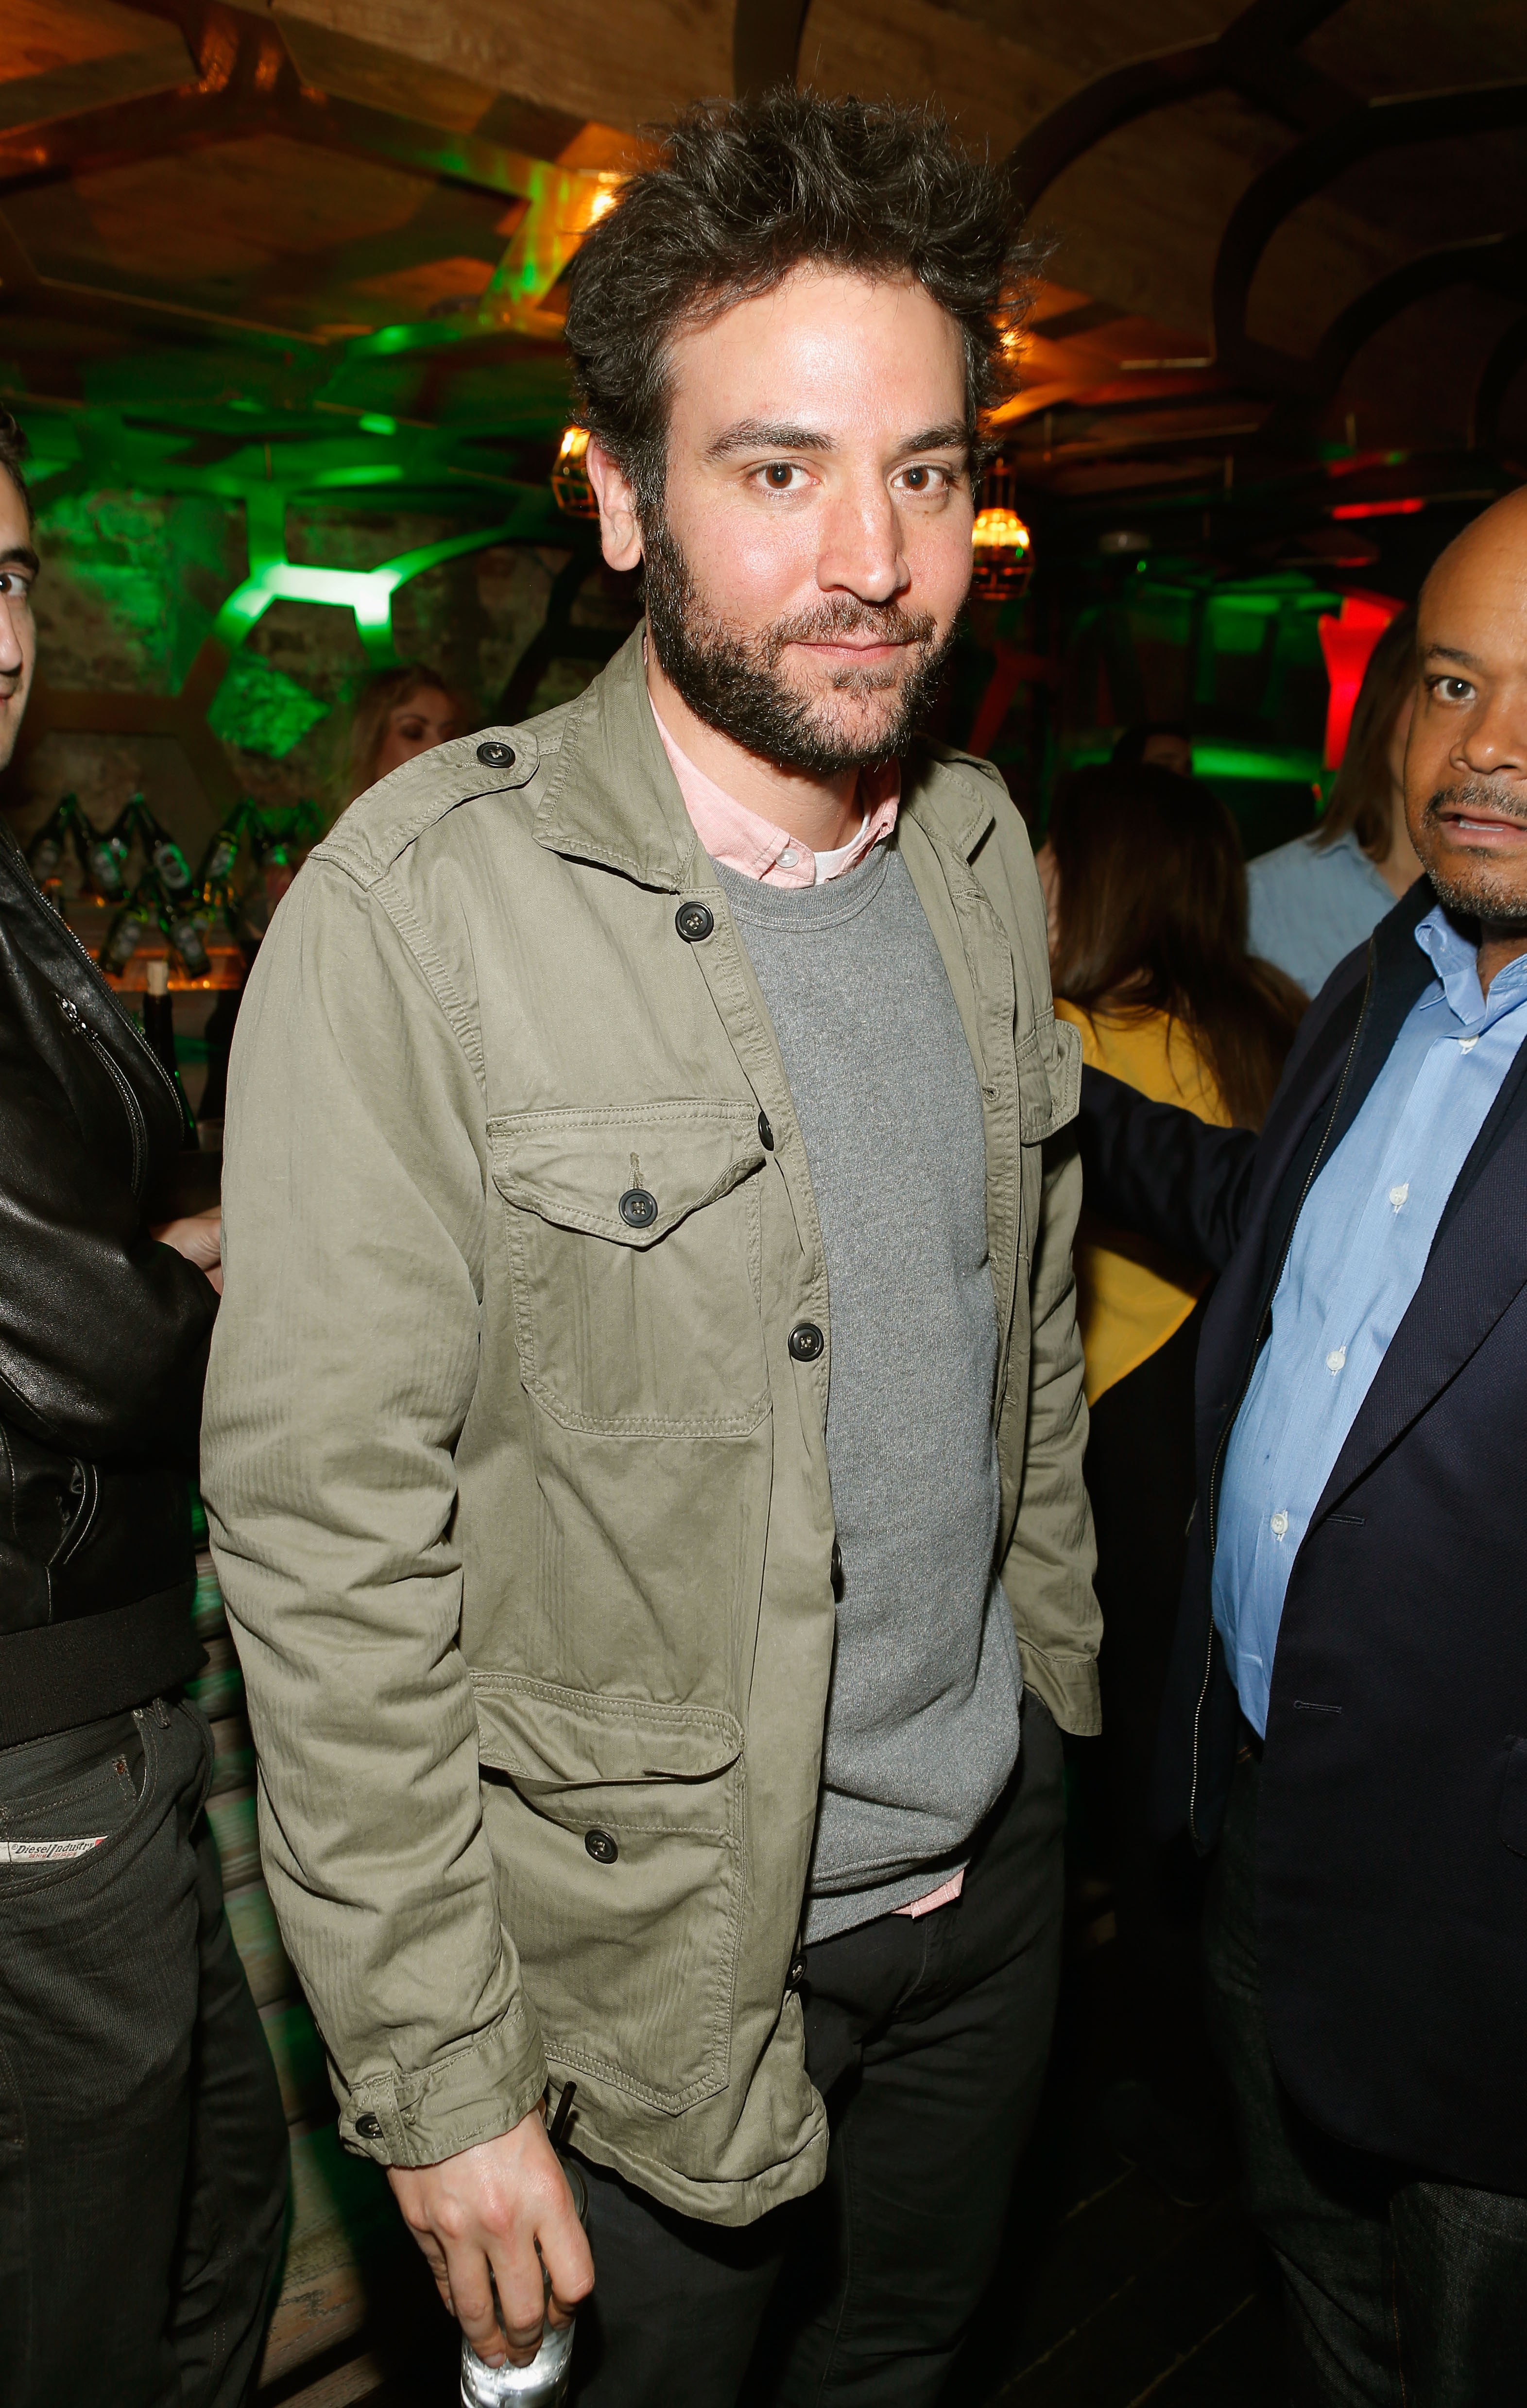 NEW YORK, NY - APRIL 22:  Actor Josh Radnor attends the Tribeca Film Festival 2013 After Party "Before Midnight" sponsored by Heineken on April 22, 2013 in New York City.  (Photo by Jemal Countess/Getty Images for 2013 Tribeca Film Festival)